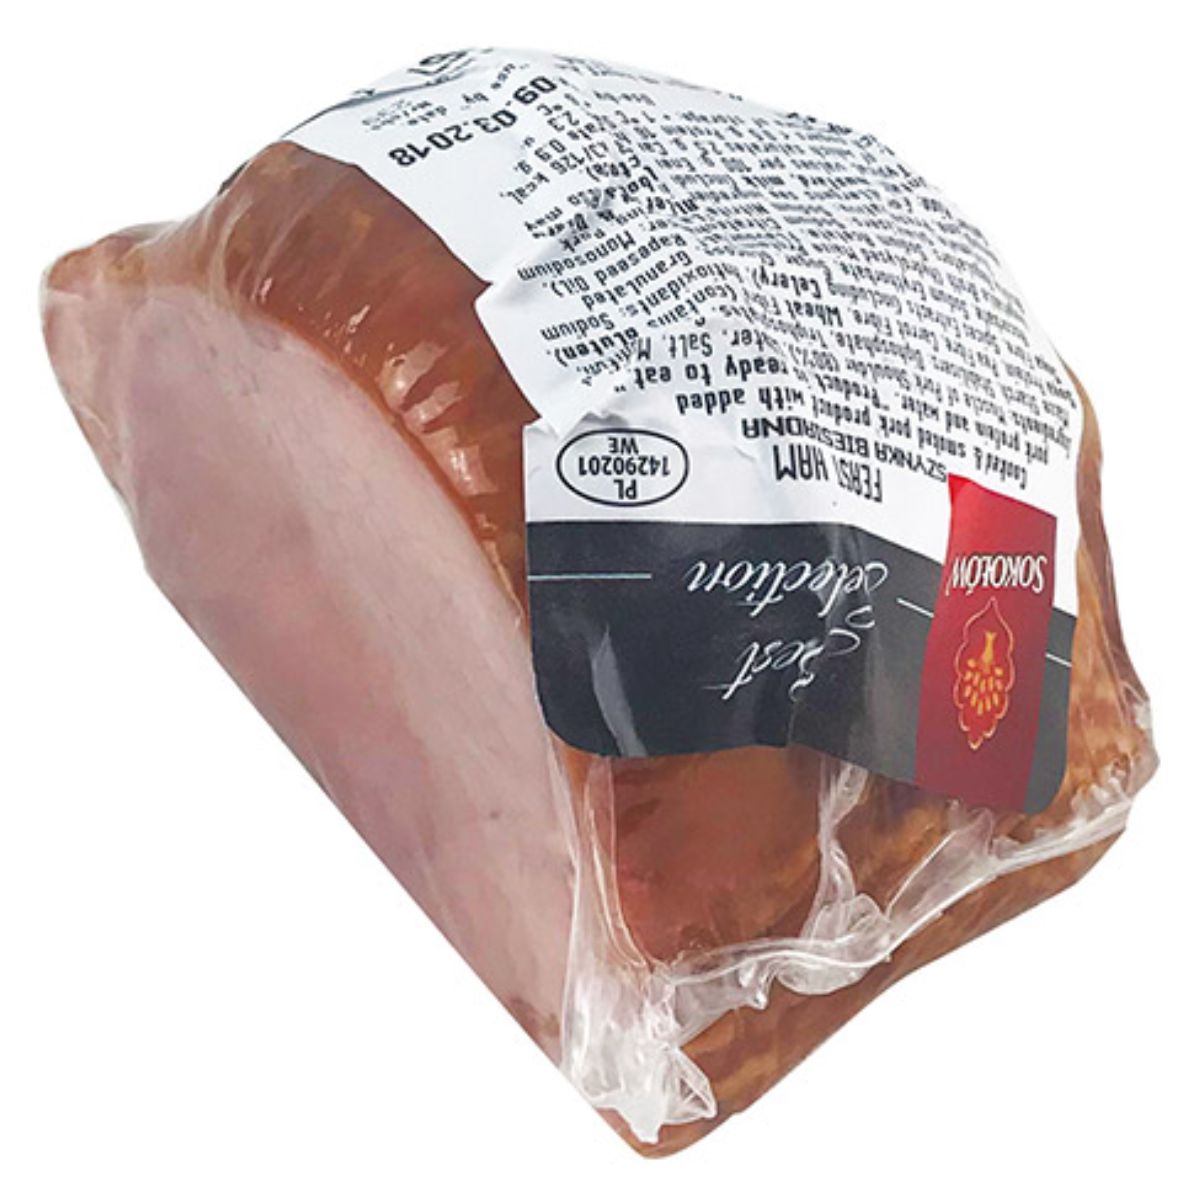 A Sokolow - Feast Ham - (Varies) wrapped in plastic on a white background.